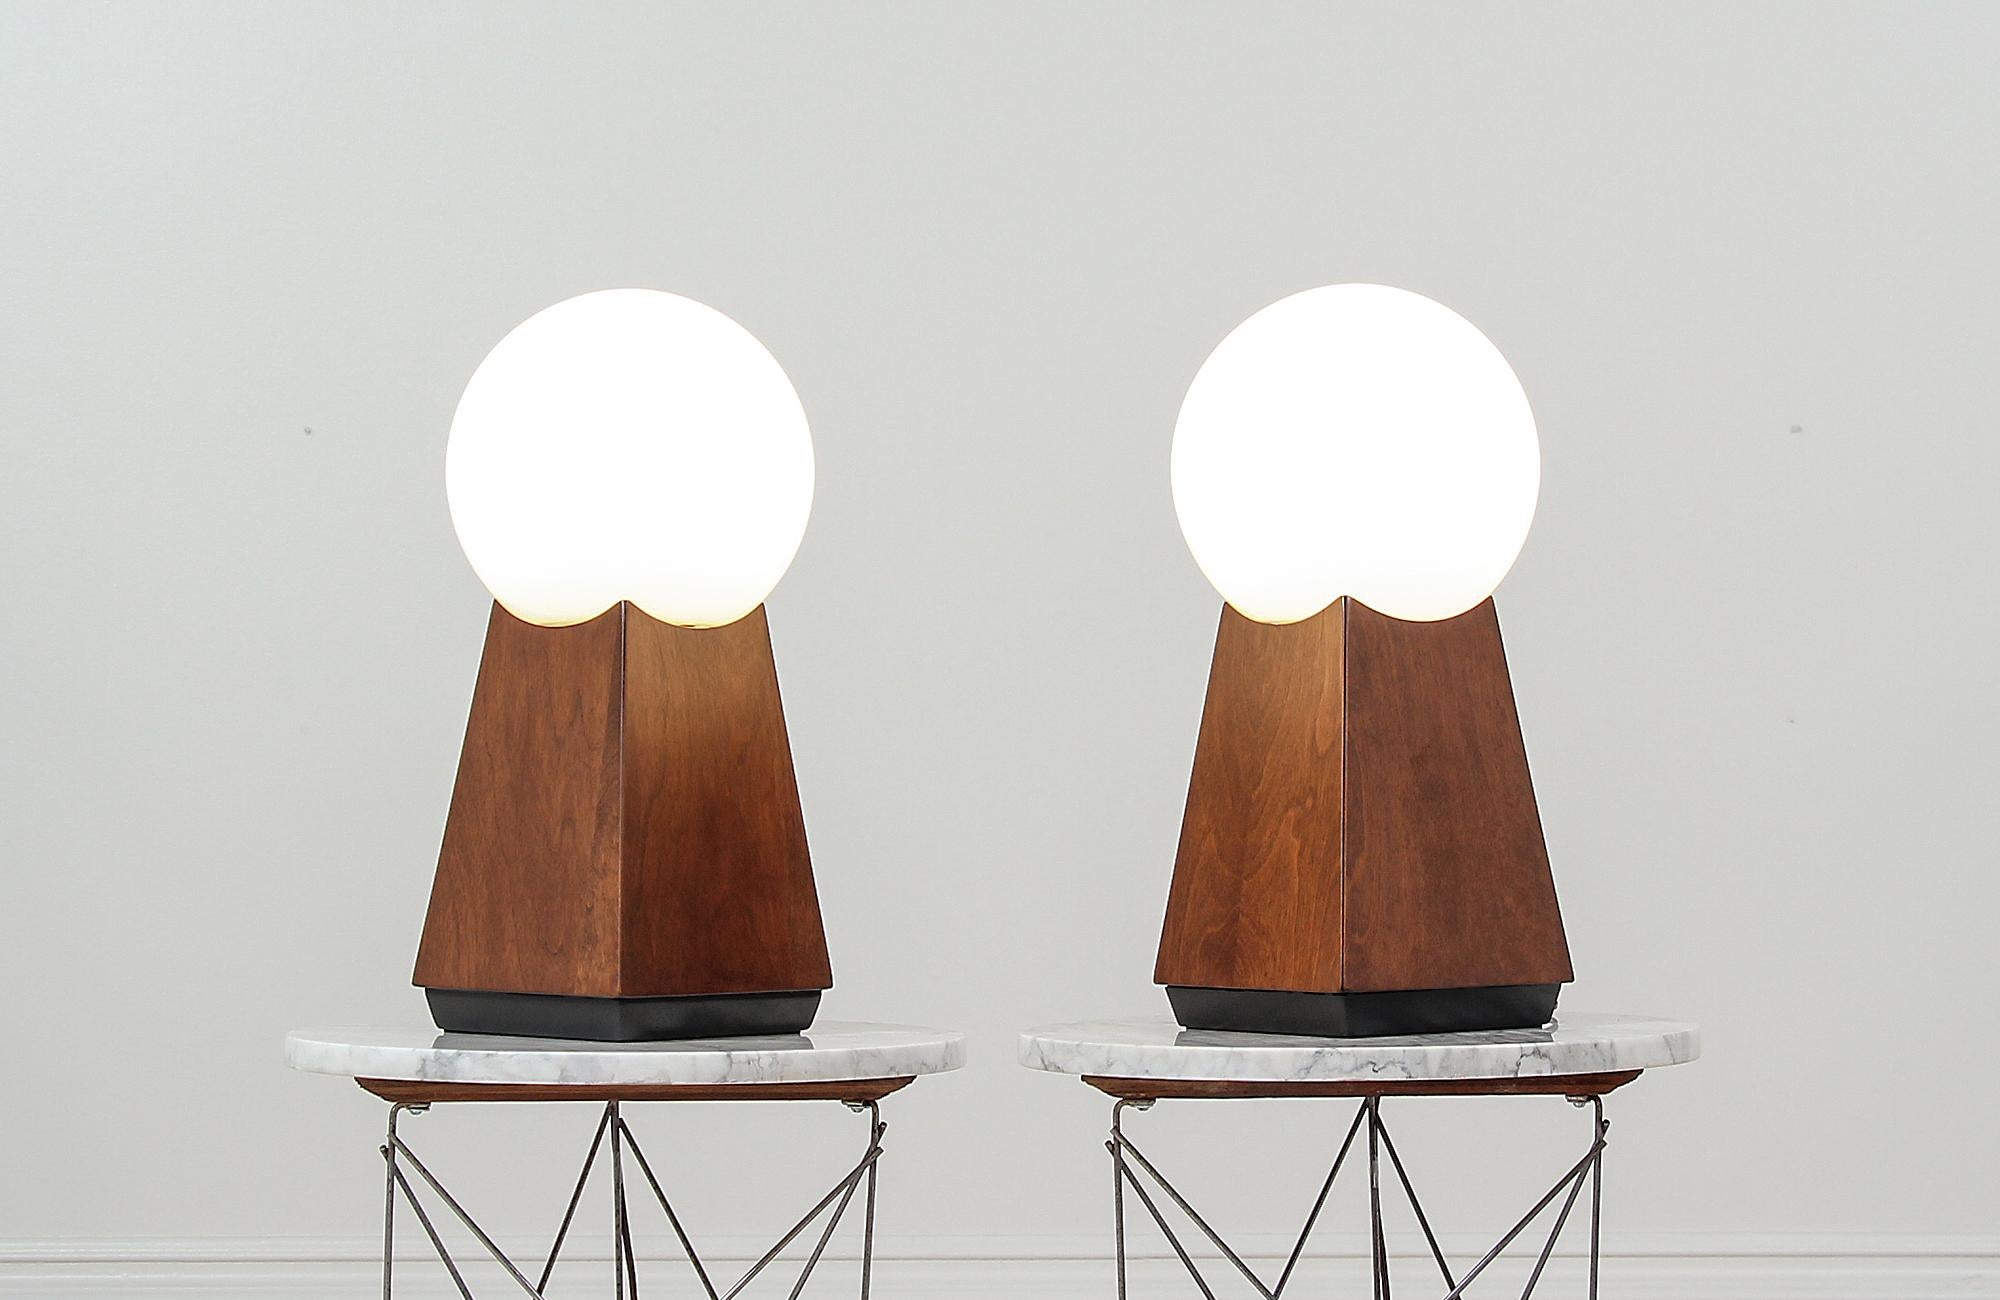 Pair of elegant table lamps designed and manufactured in the United States circa 1960s. These fantastic modern lamps feature a walnut wood body with an exquisite grain detail throughout adding texture and warmth to this rare design. The bases have